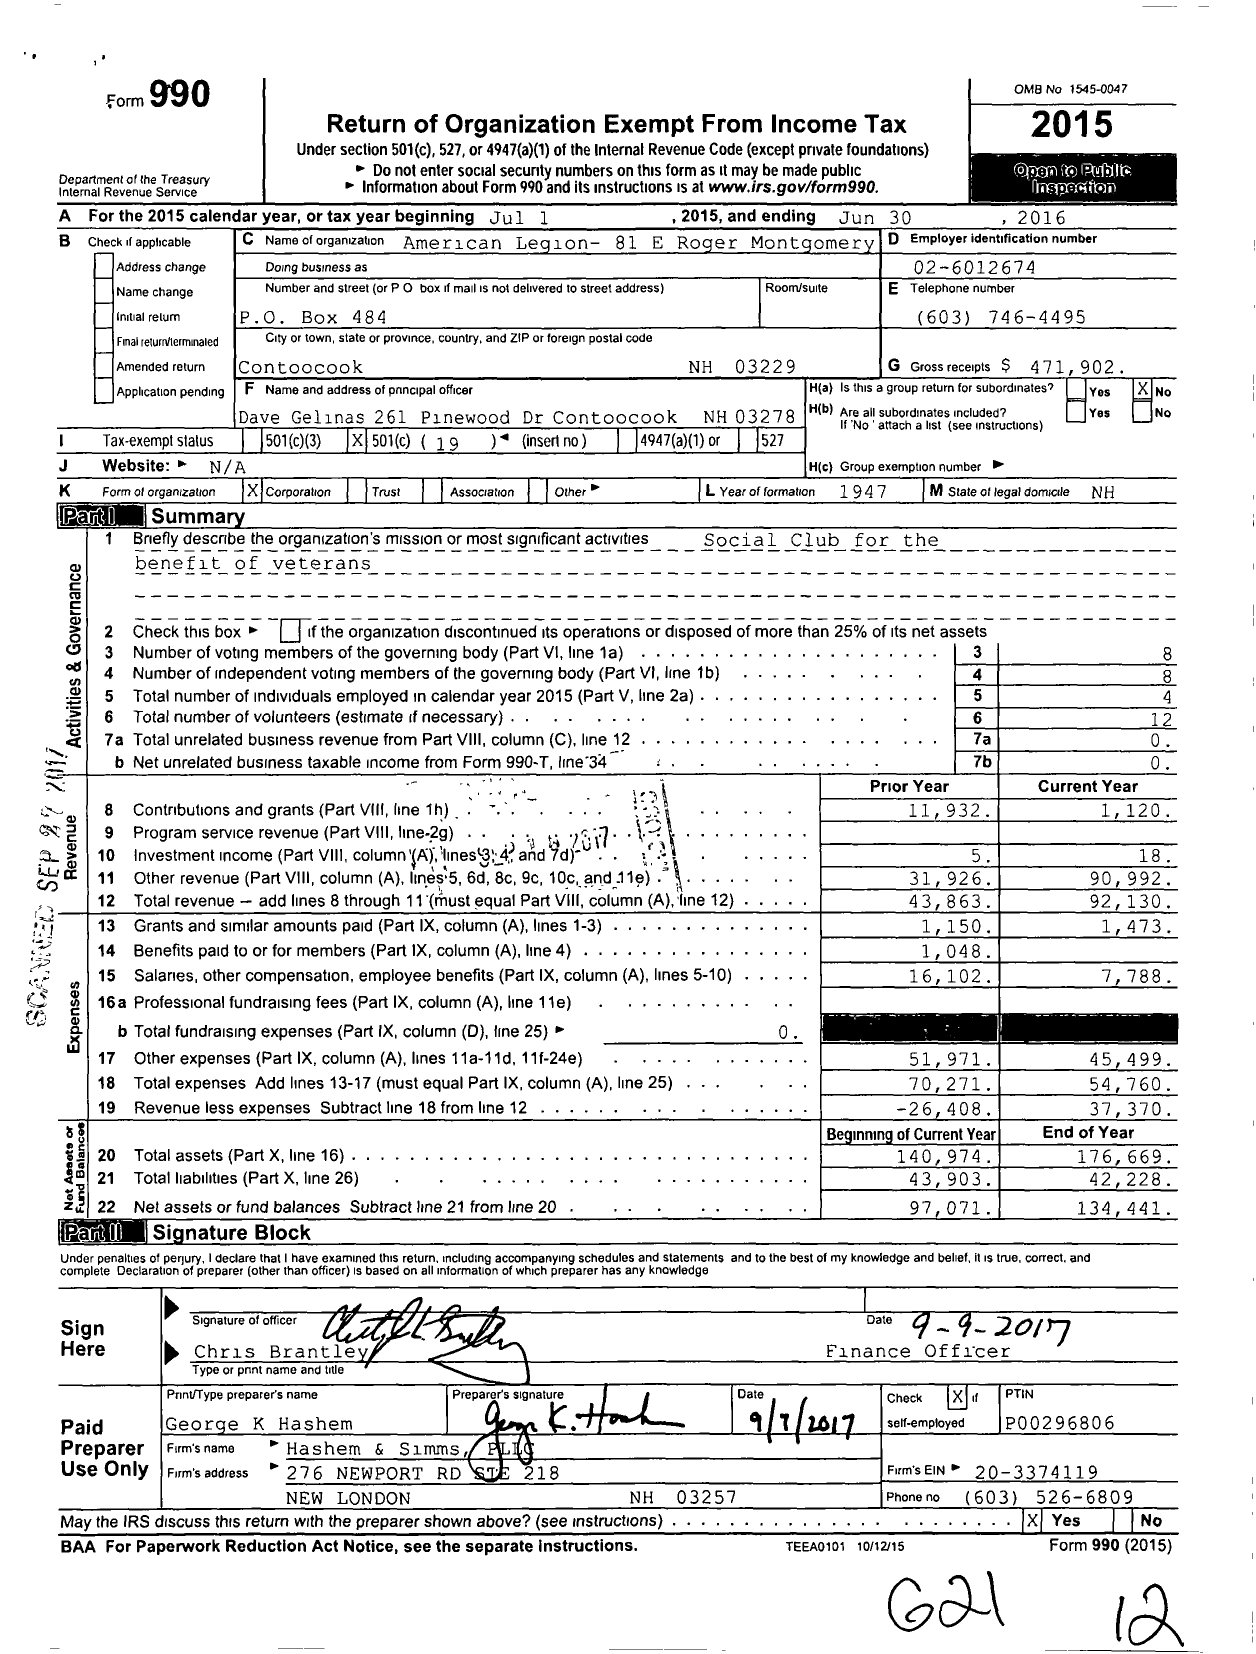 Image of first page of 2015 Form 990O for American Legion 81 E Roger Montgomery